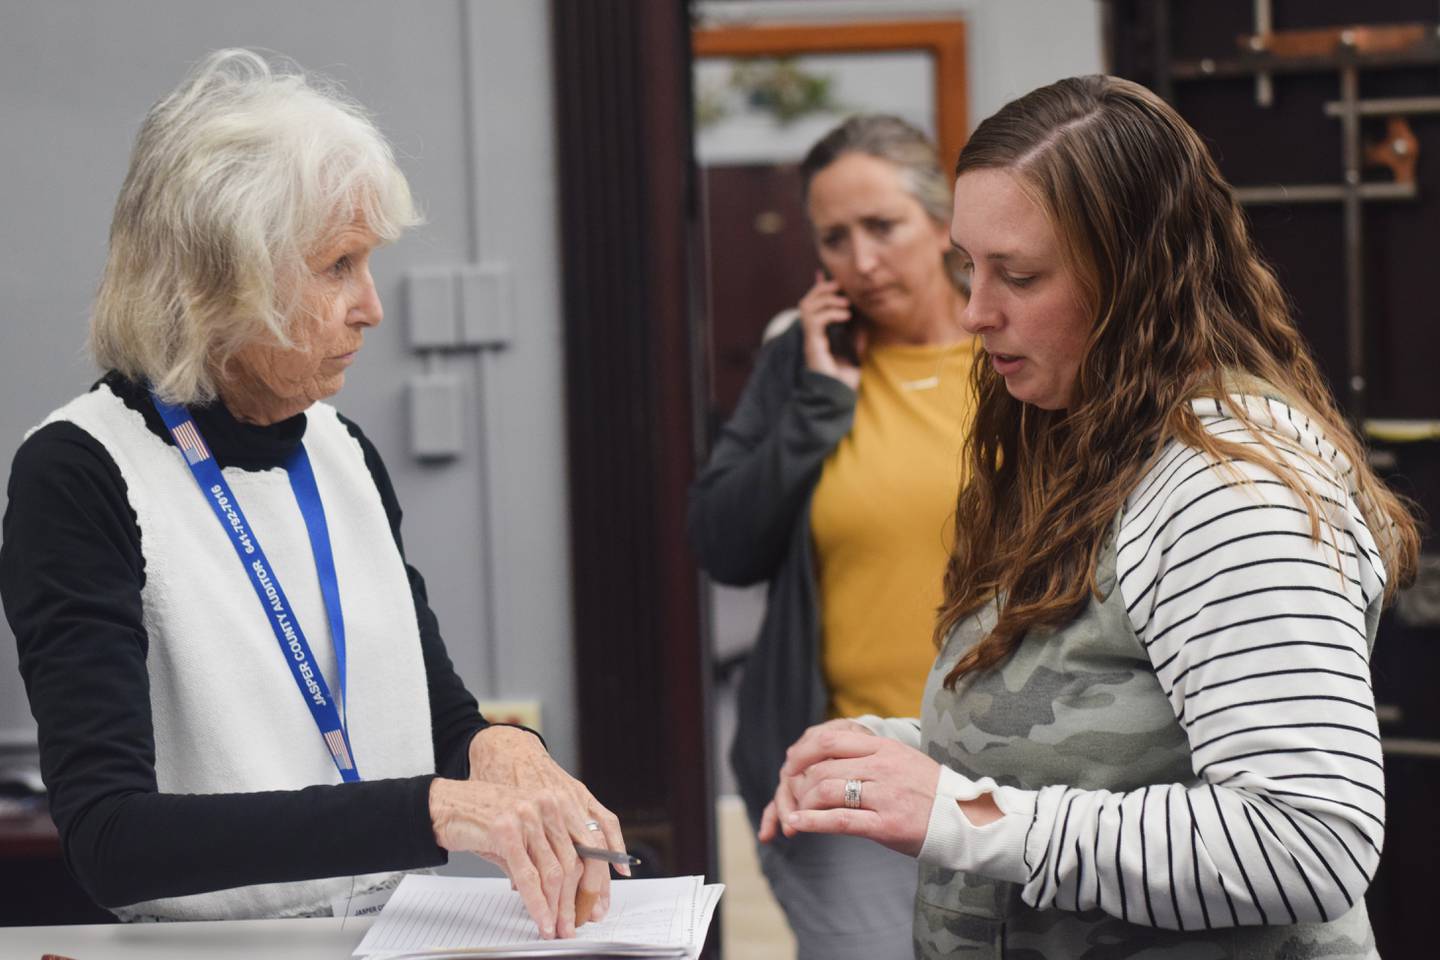 Jasper County Auditor Jenna Jennings, right, speaks with a volunteer during Election Day.